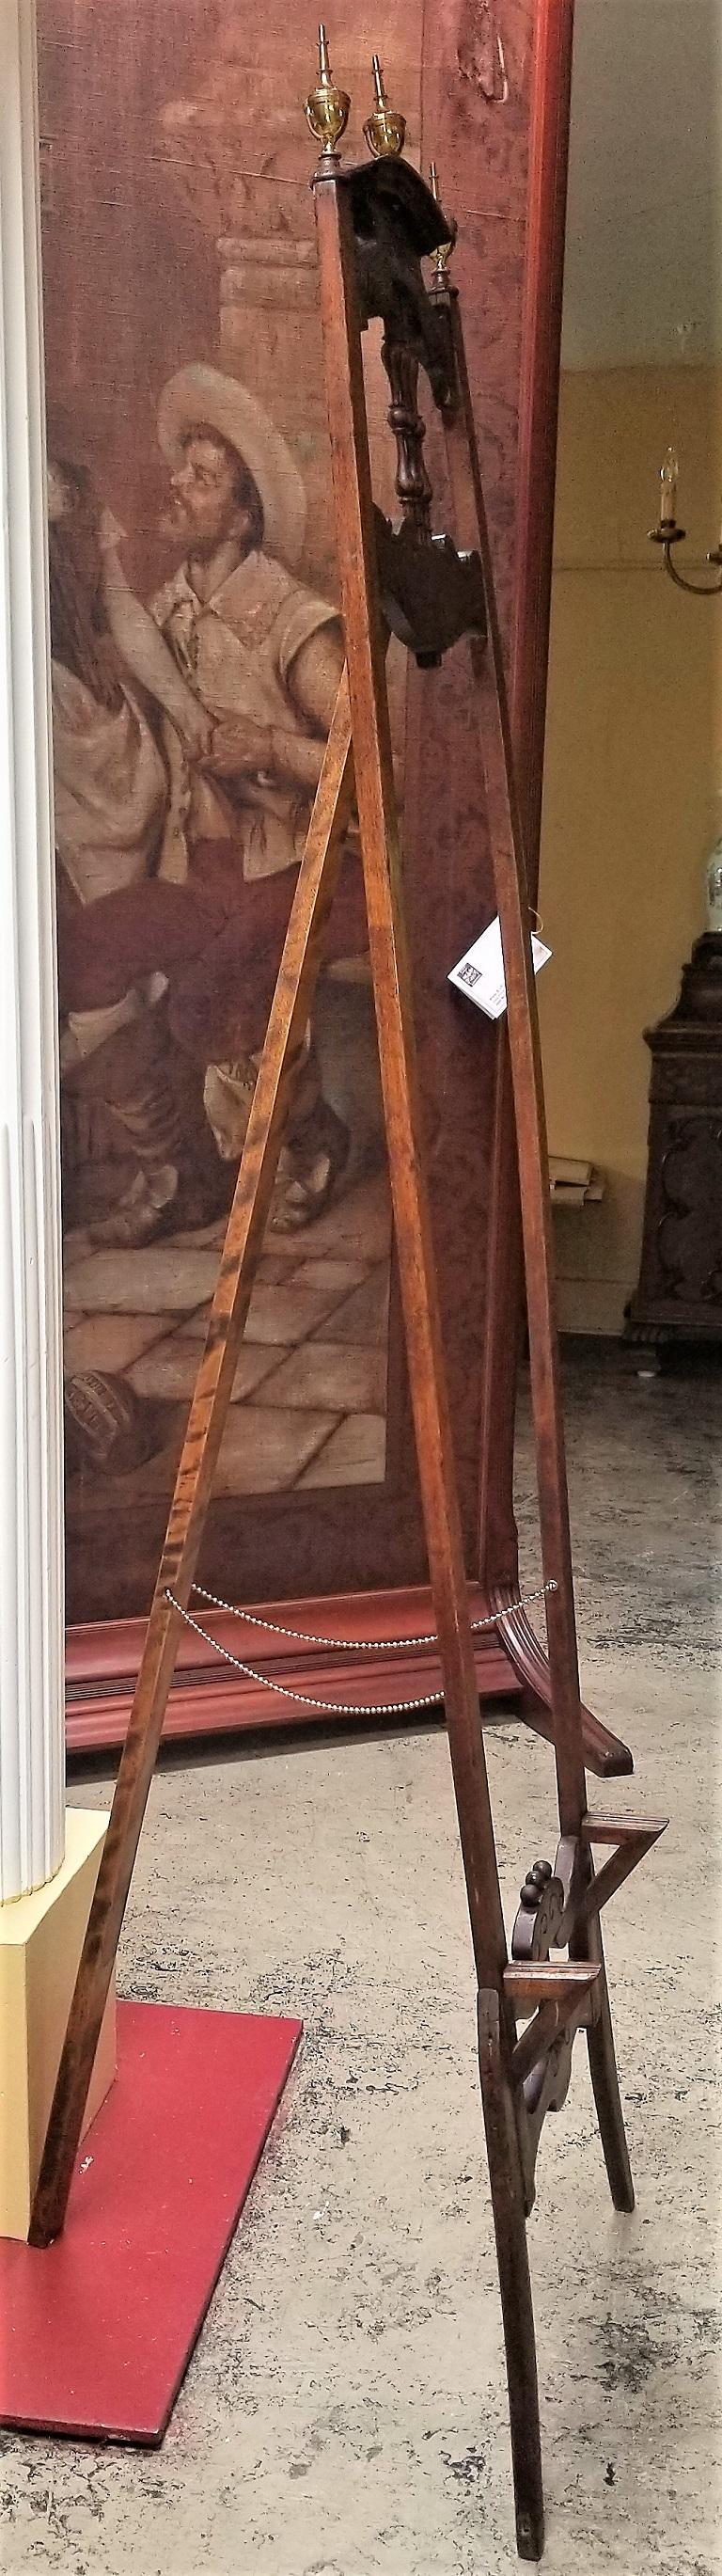 Victorian Eastlake Large and Decorative Easel For Sale at 1stDibs  large  decorative easel, large decorative floor easel, decorative floor easels for  pictures